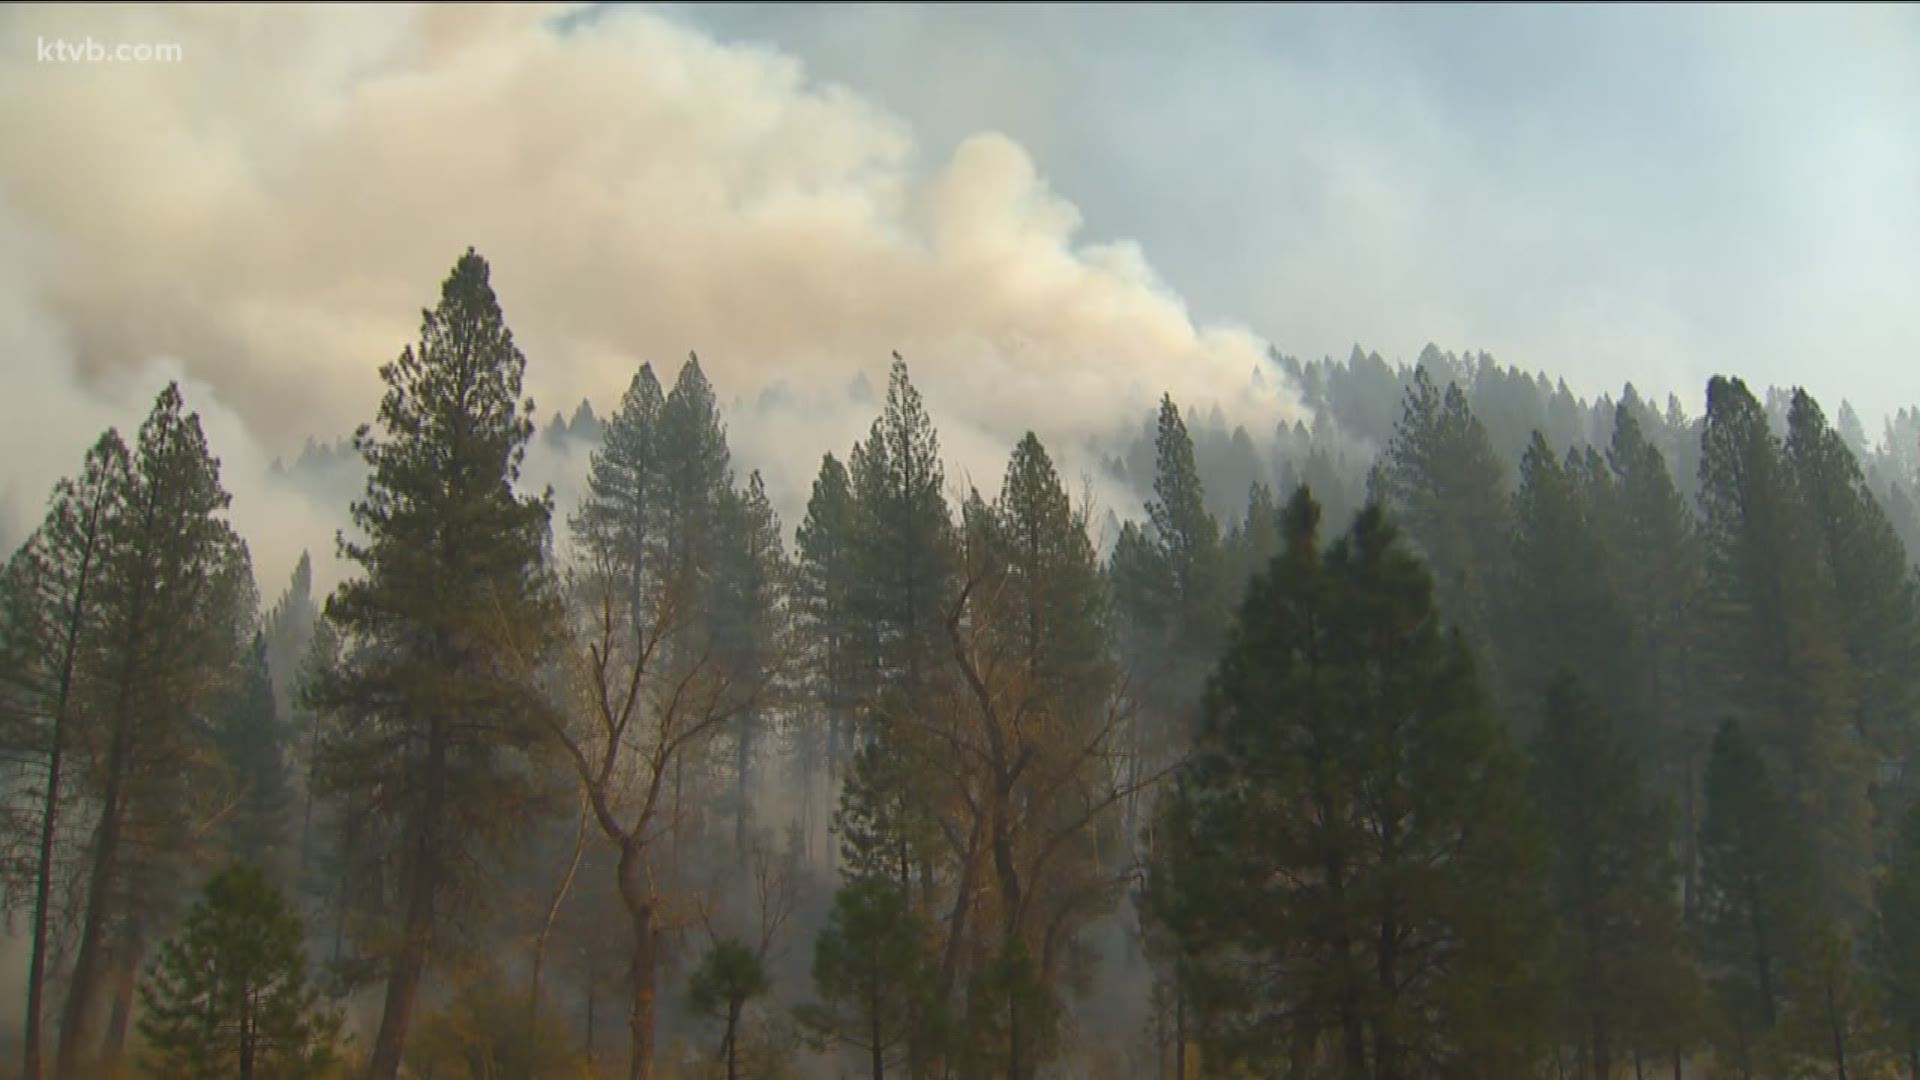 Scientists say the research is happening right now with wildfires burning in Idaho.